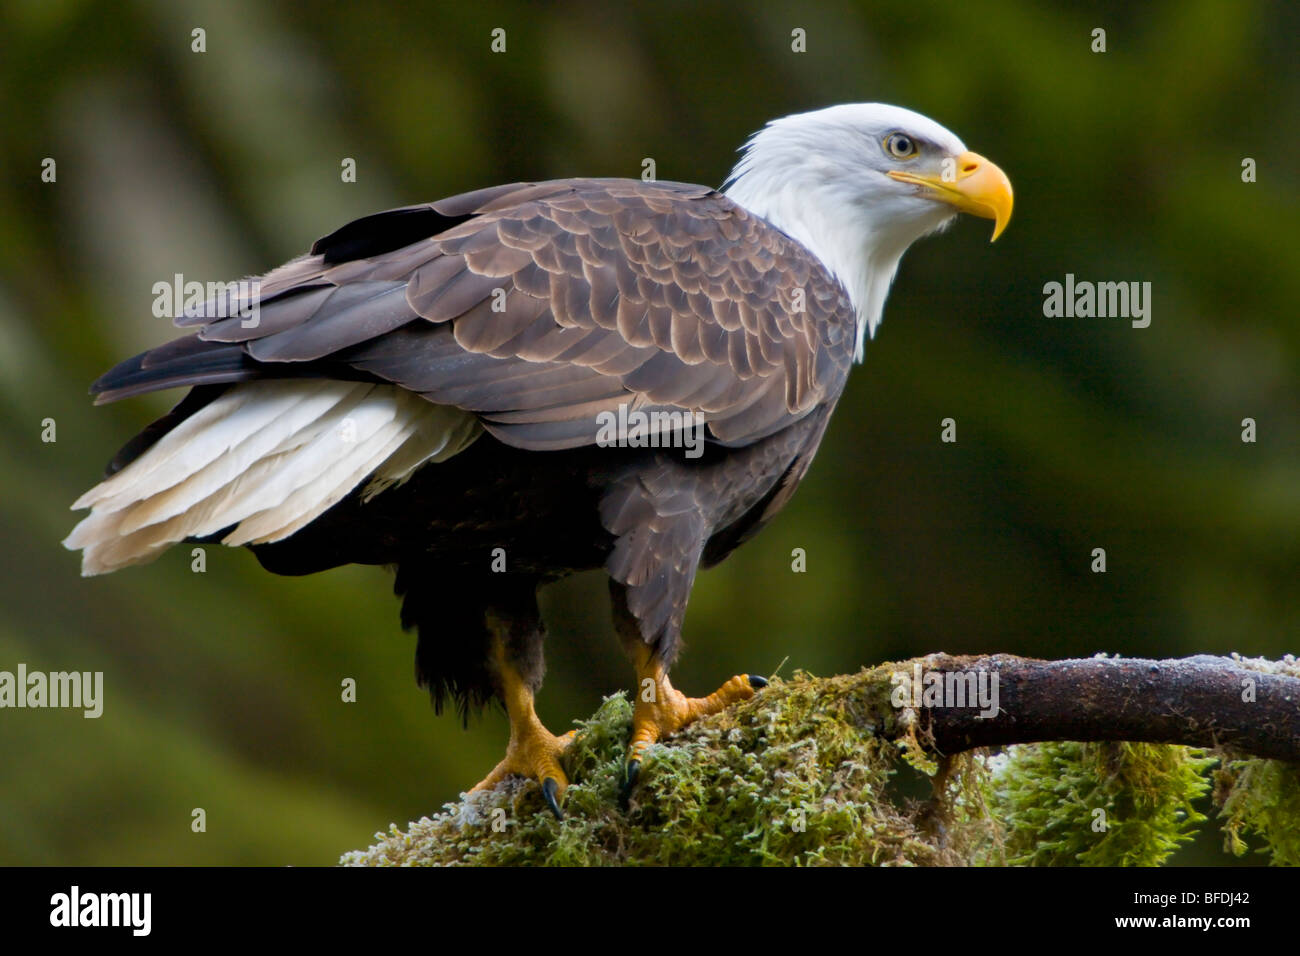 Bald eagle (Haliaeetus leucocephalus) perched on a mossy branch in Victoria, Vancouver Island, British Columbia, Canada Stock Photo